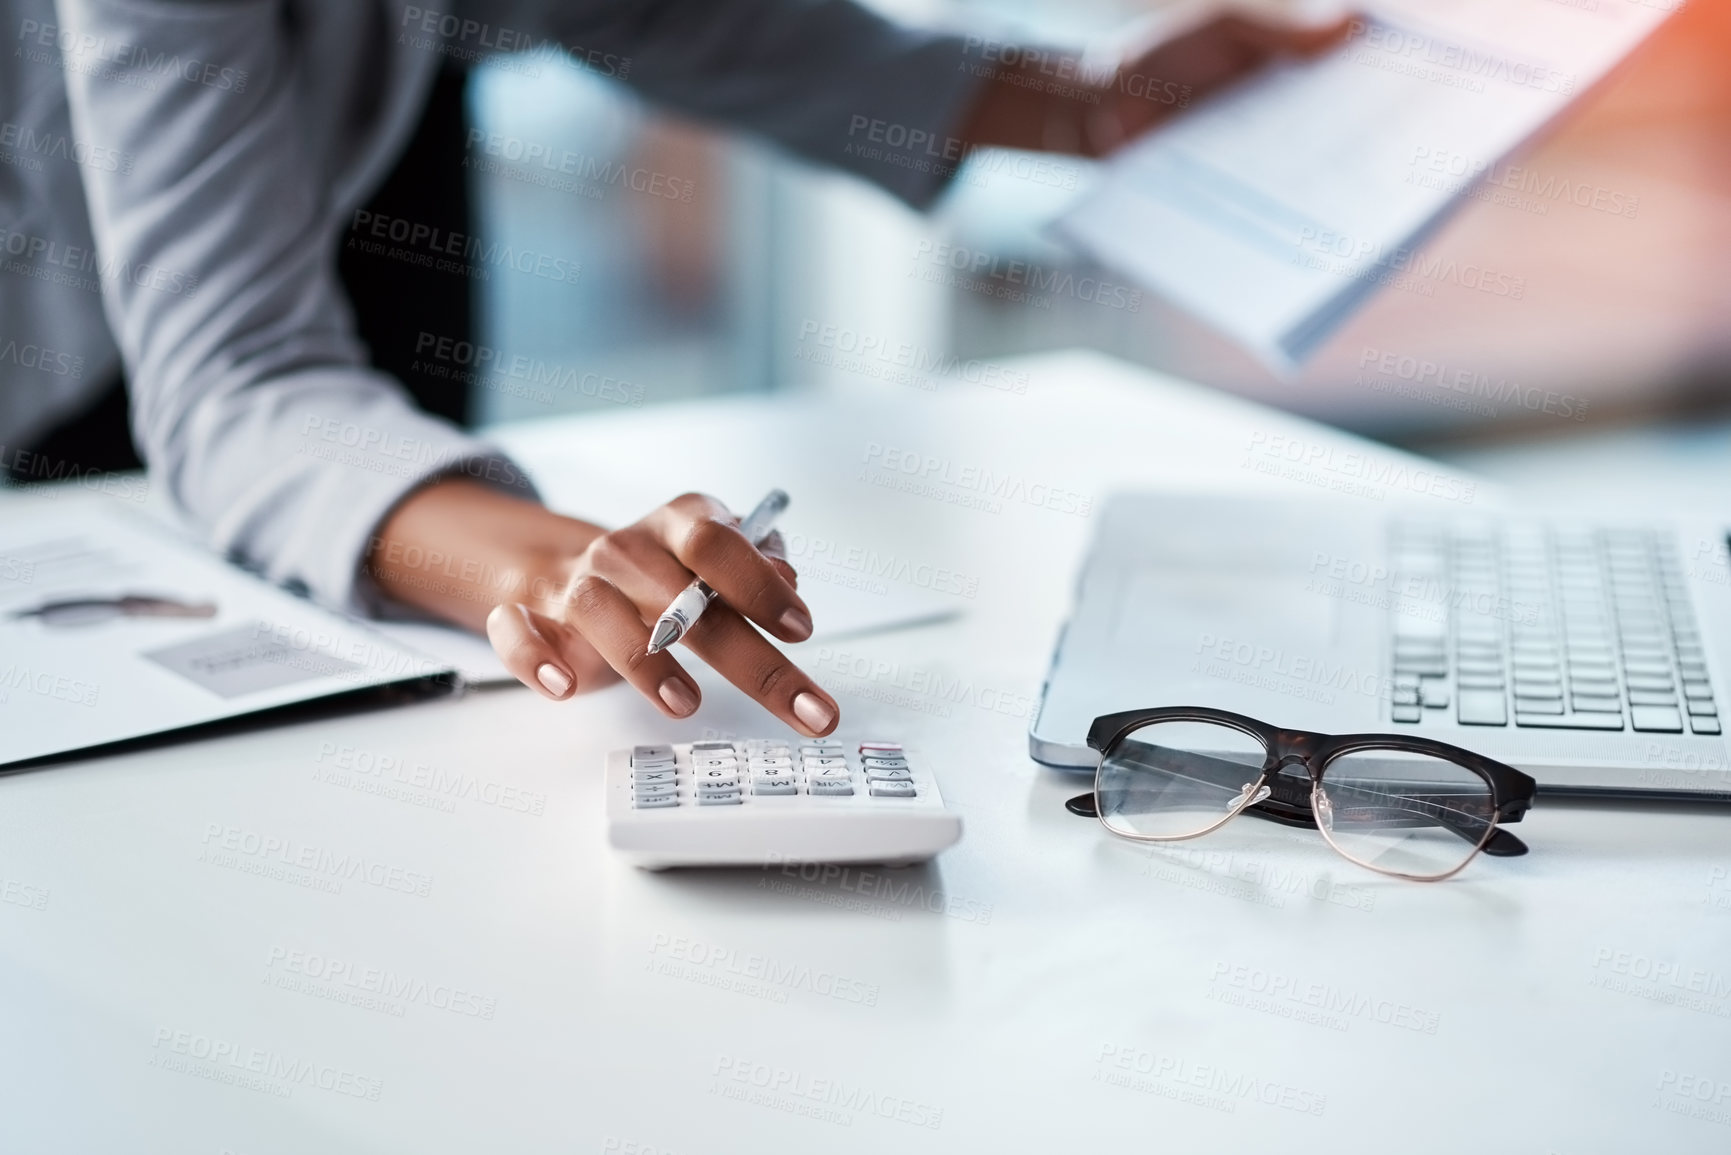 Buy stock photo Accountant, businesswoman or banker using calculator, checking paperwork and documents while preparing financial data report in an office. Hands of a woman doing payroll or calculating annual tax